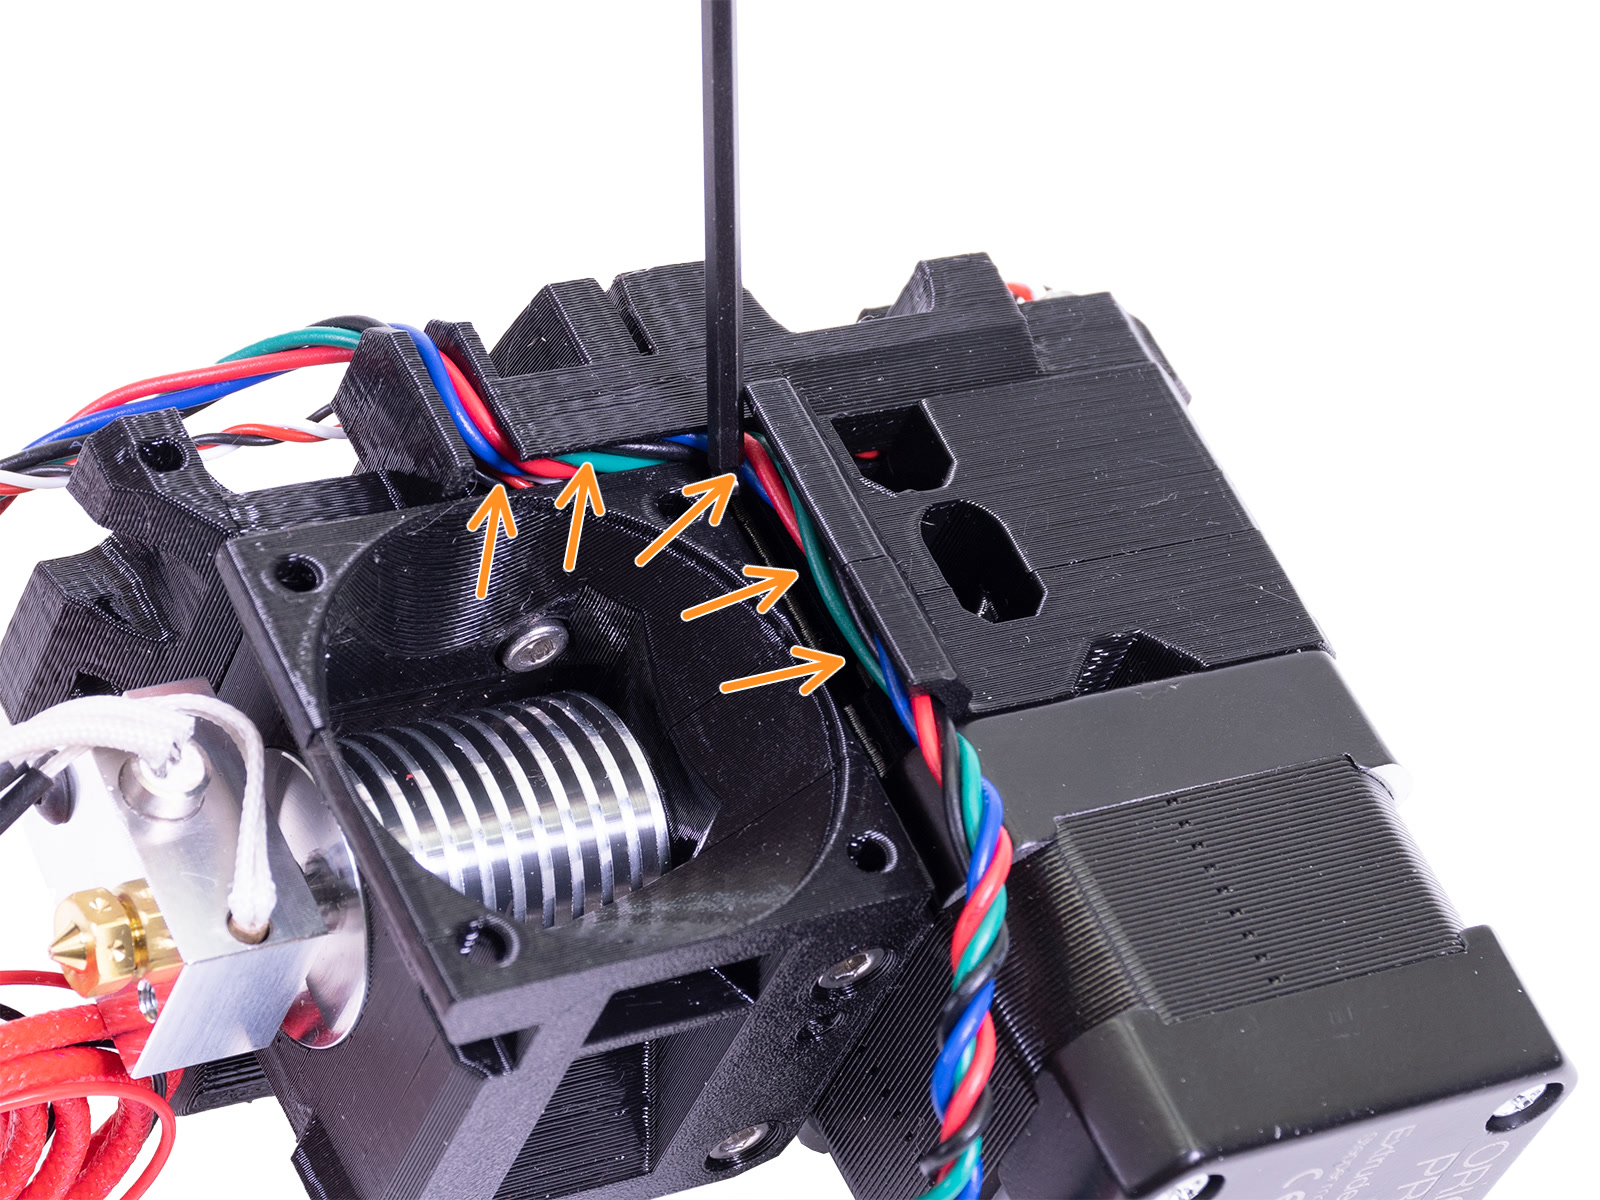 Hotend fan cable adjustment (version A)